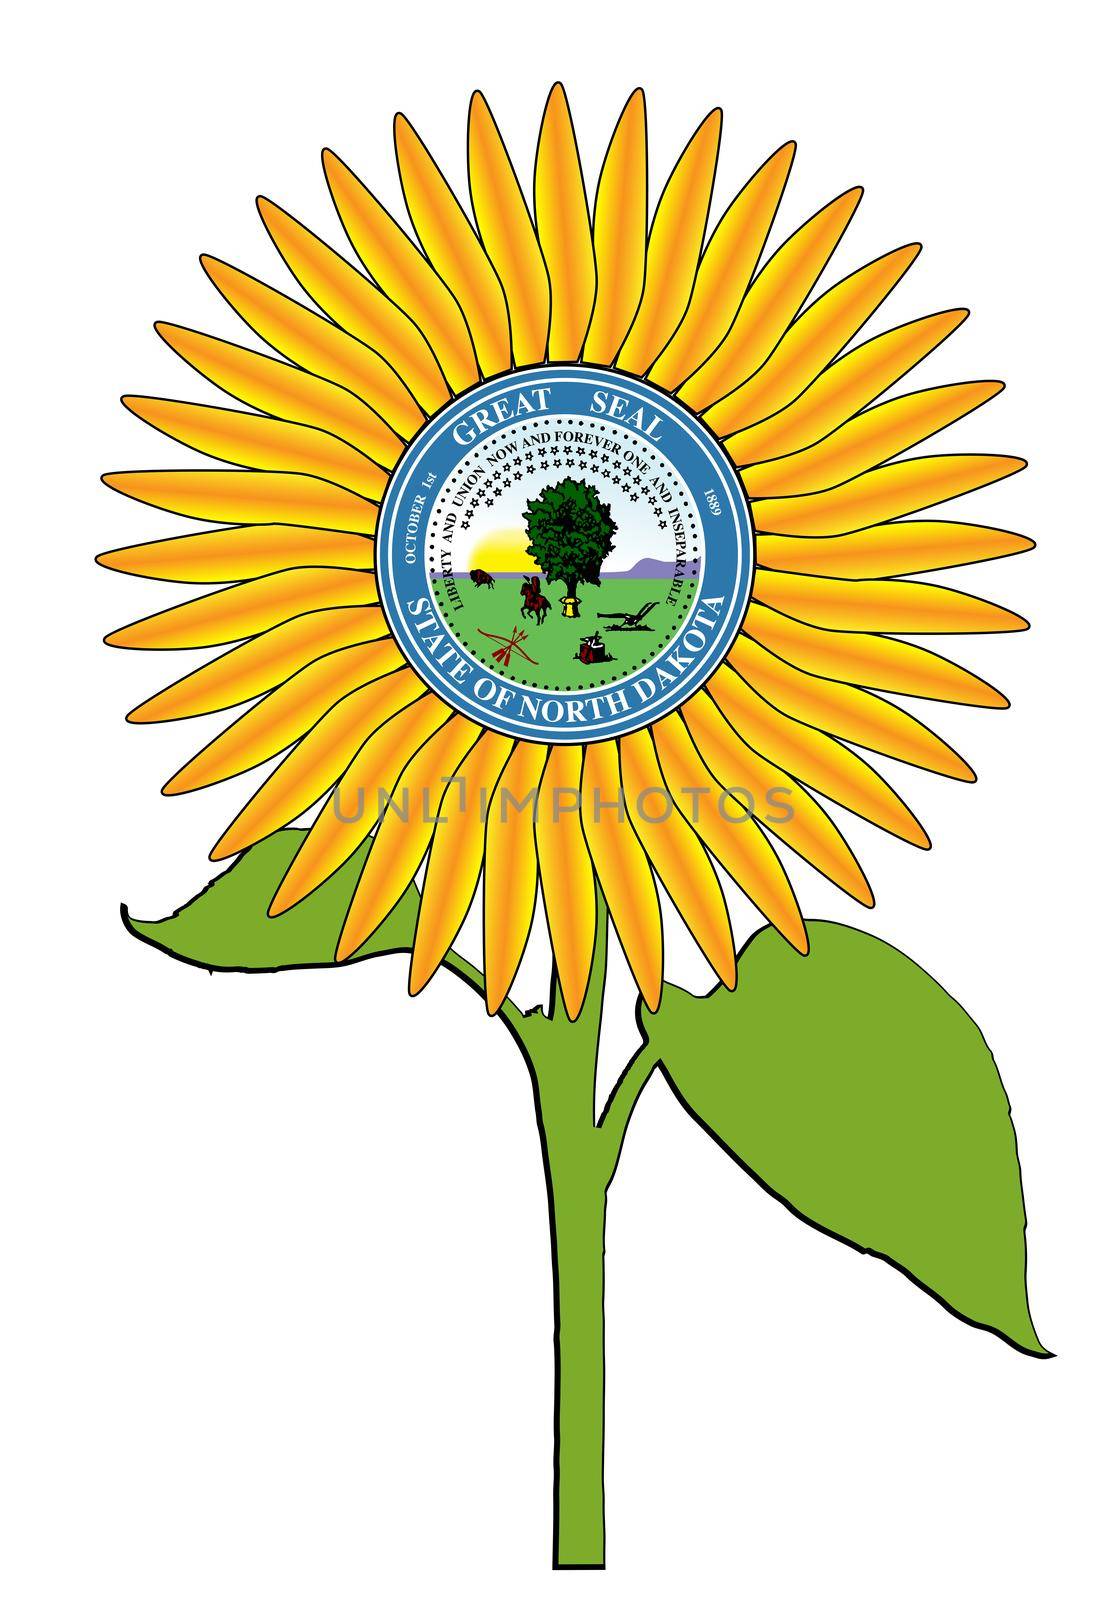 The head of a large sunflower plant isolated on a white background with the seal of the USA state of North Dakota a major sunflower growing state